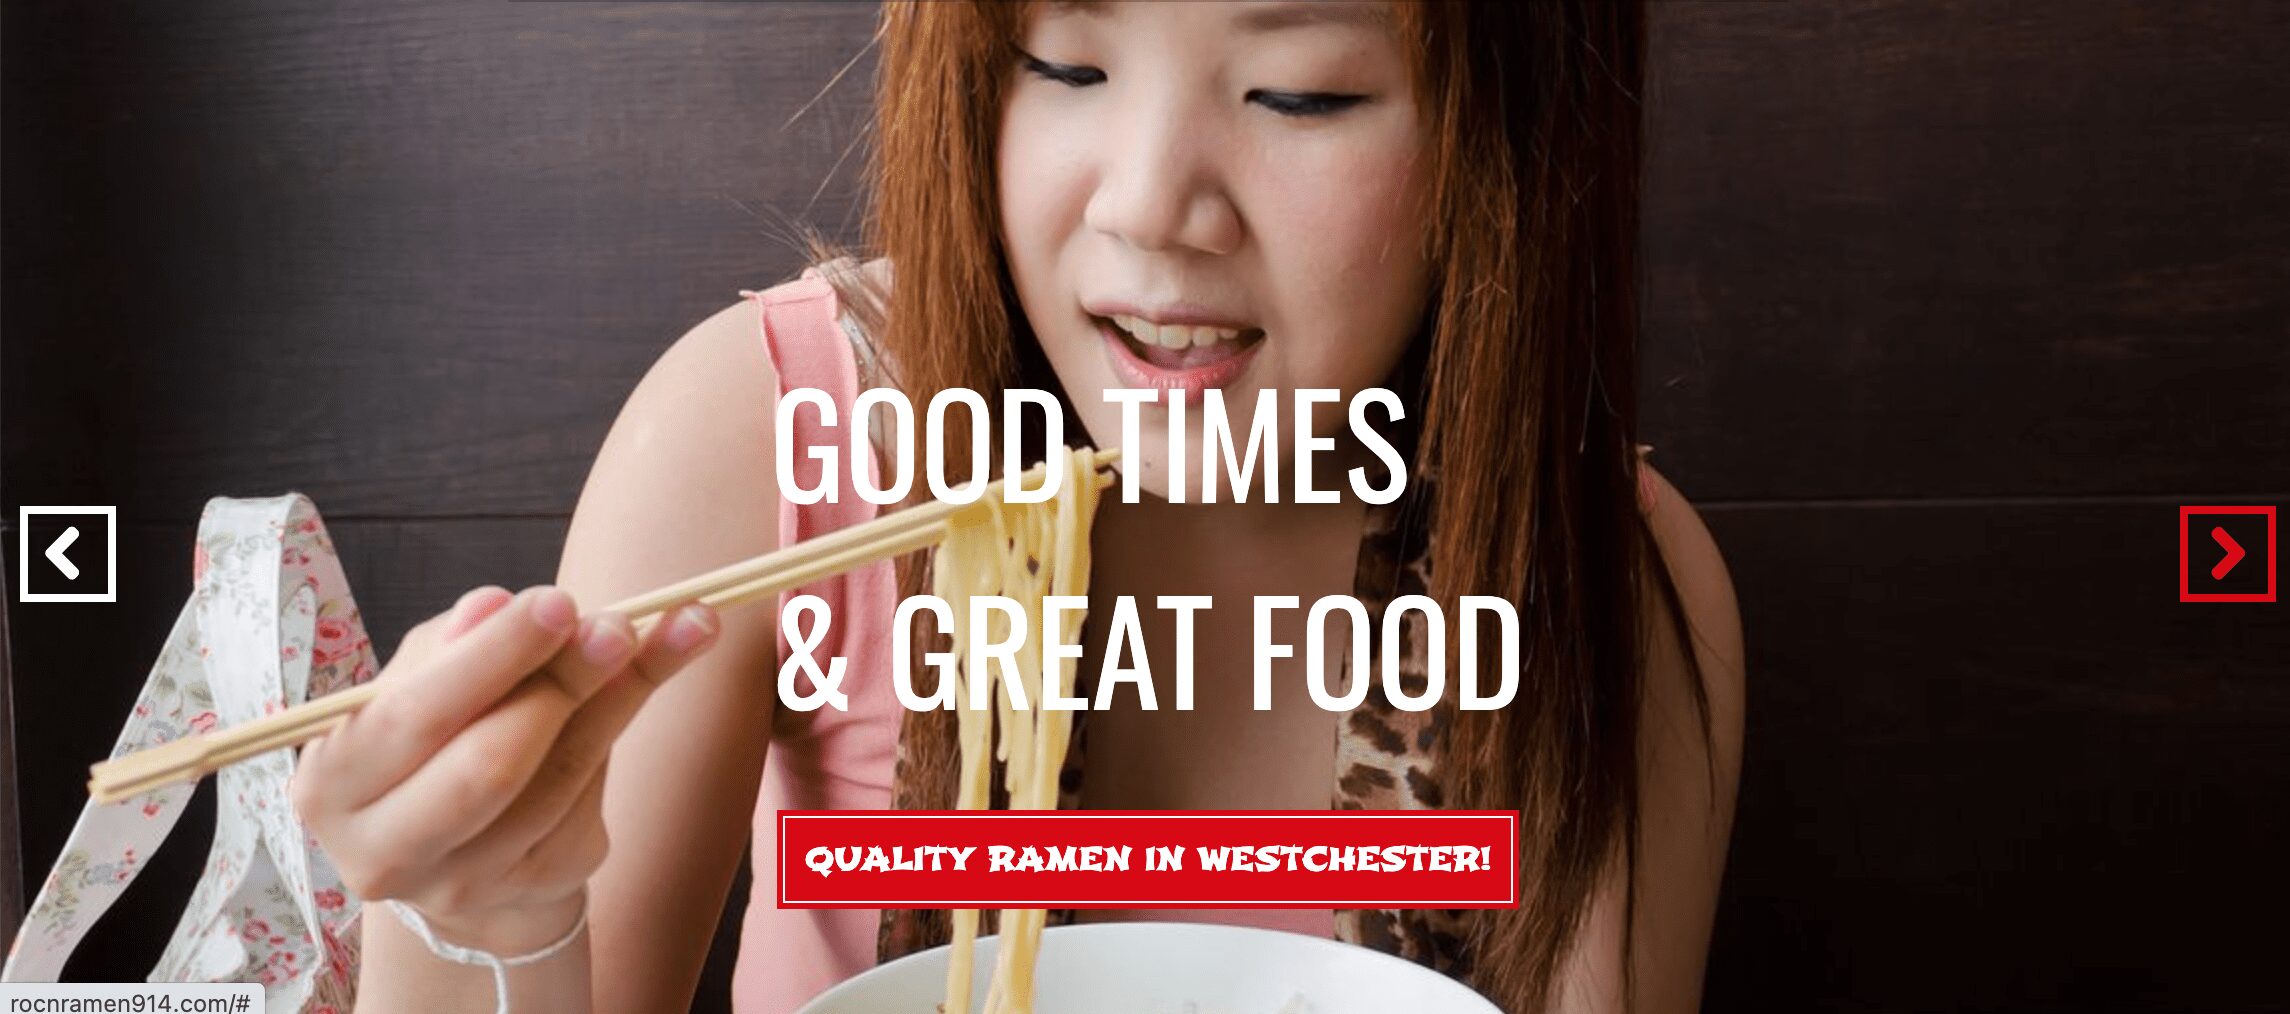 Featured image for “Roc n’ Ramen”